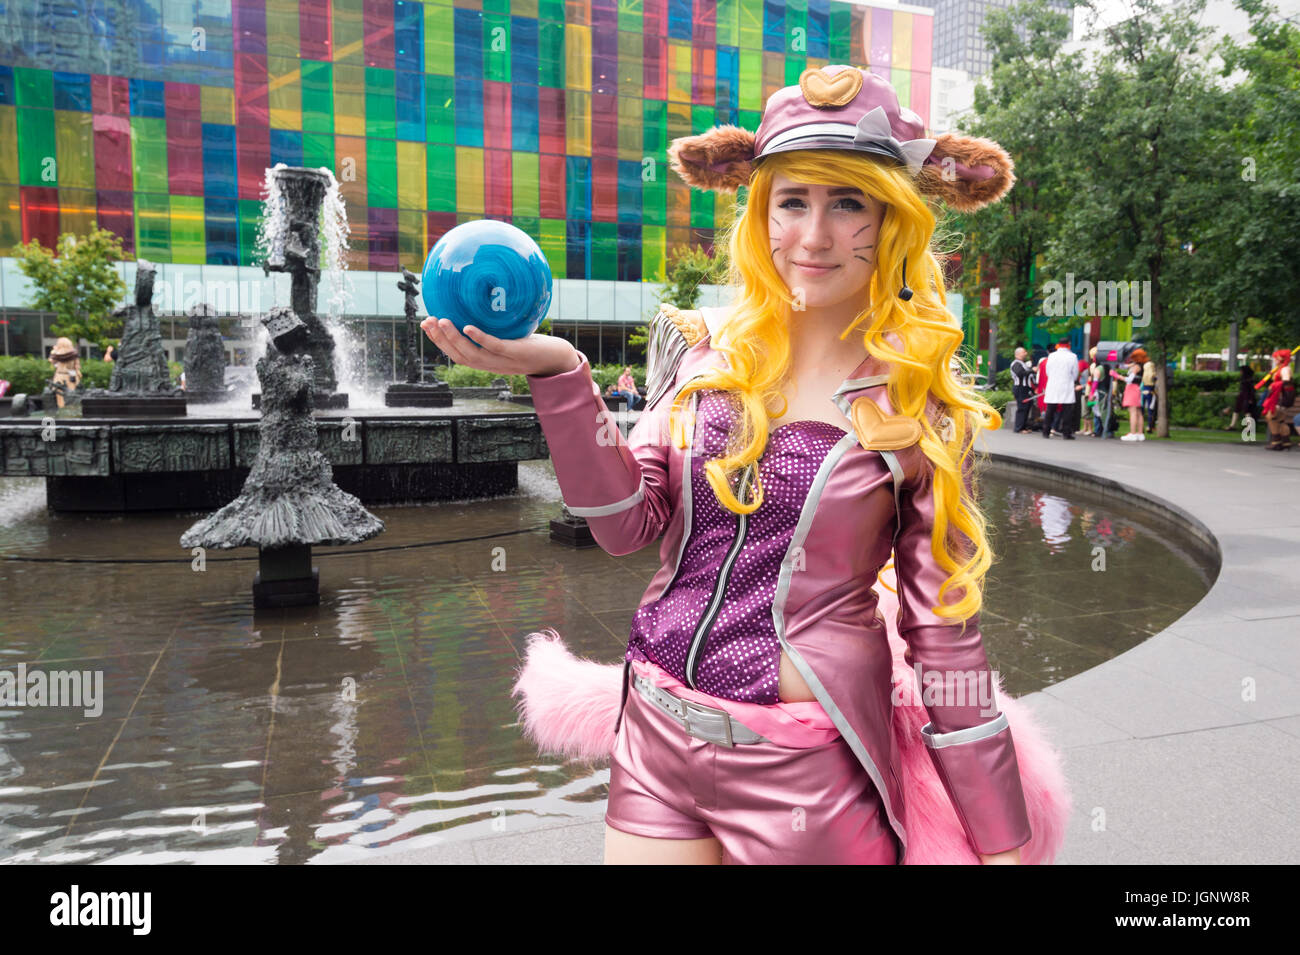 Montreal, Canada. 8th July, 2017. Pop-culture fan convention Comic Con Credit: Marc Bruxelle/Alamy Live News Stock Photo